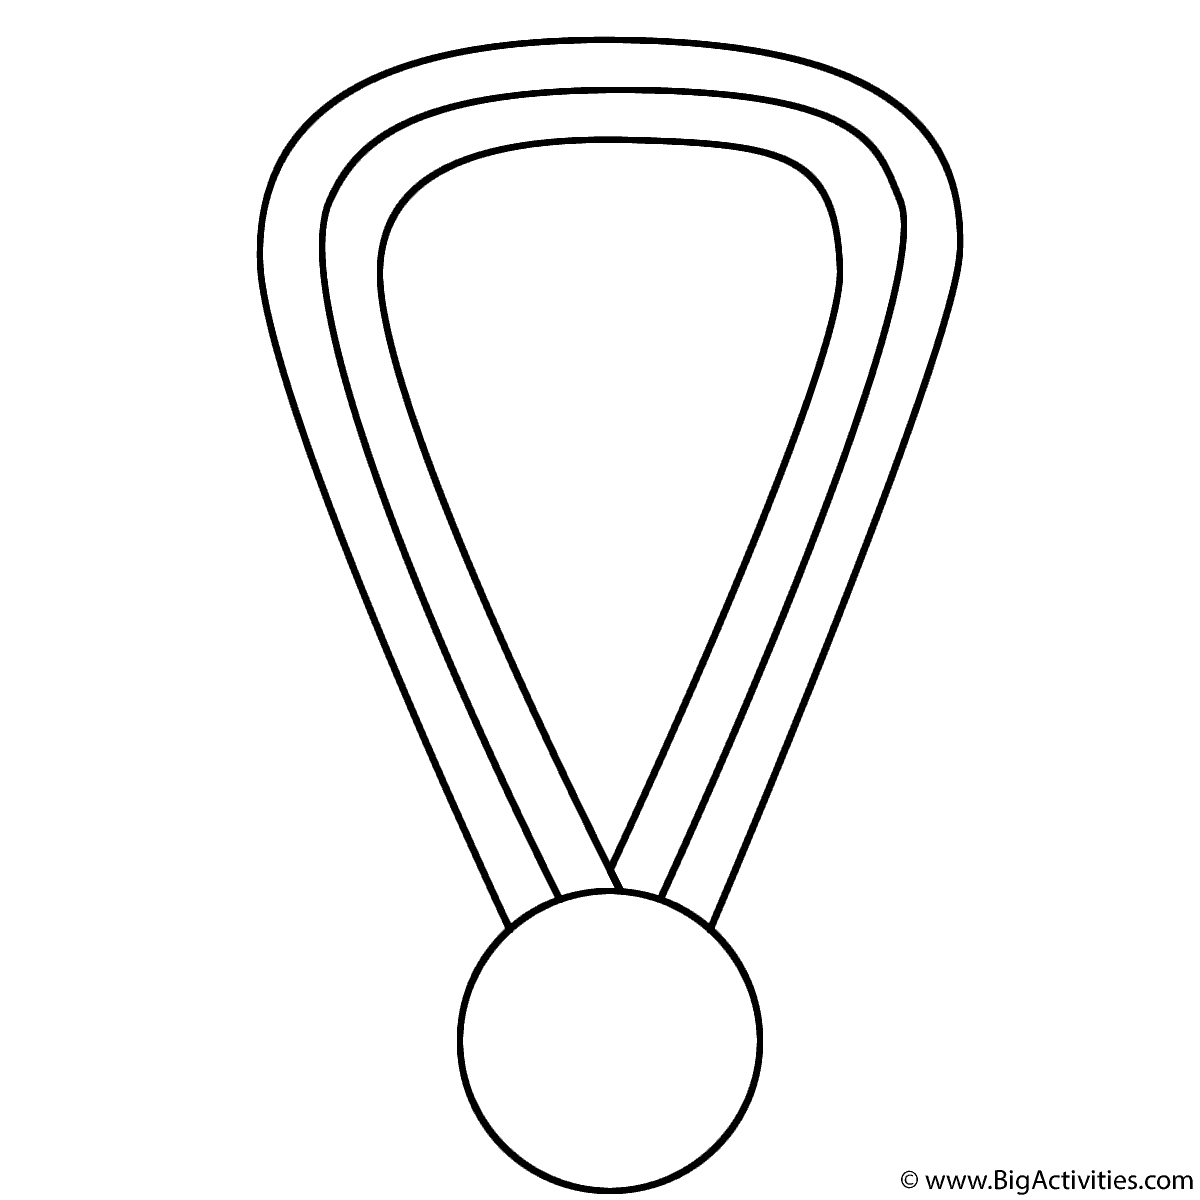 Olympic Silver Medal - Coloring Page (Olympics)